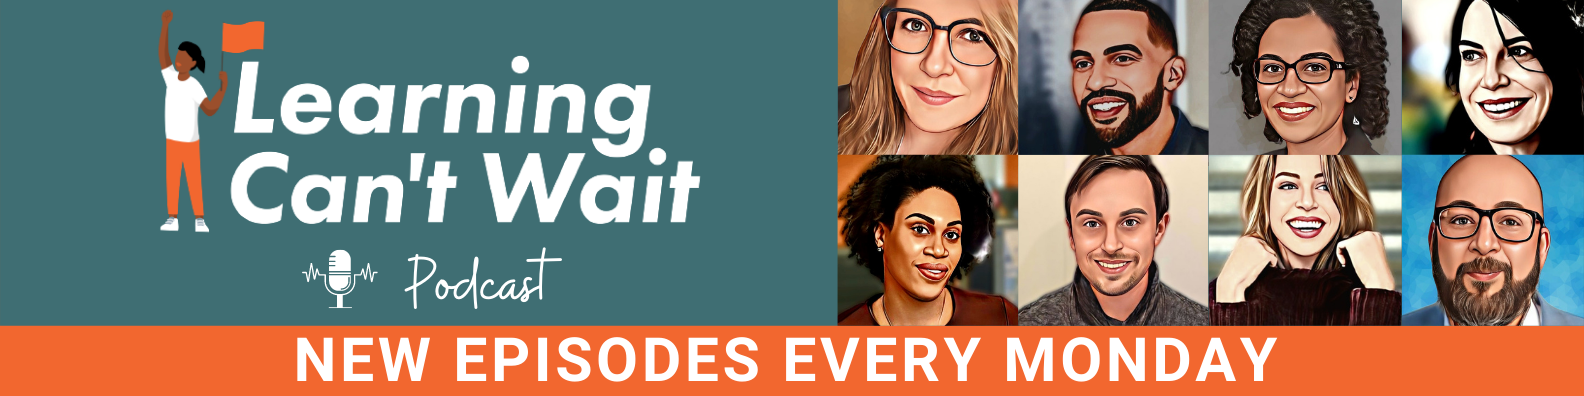 learning can't wait podcast banner